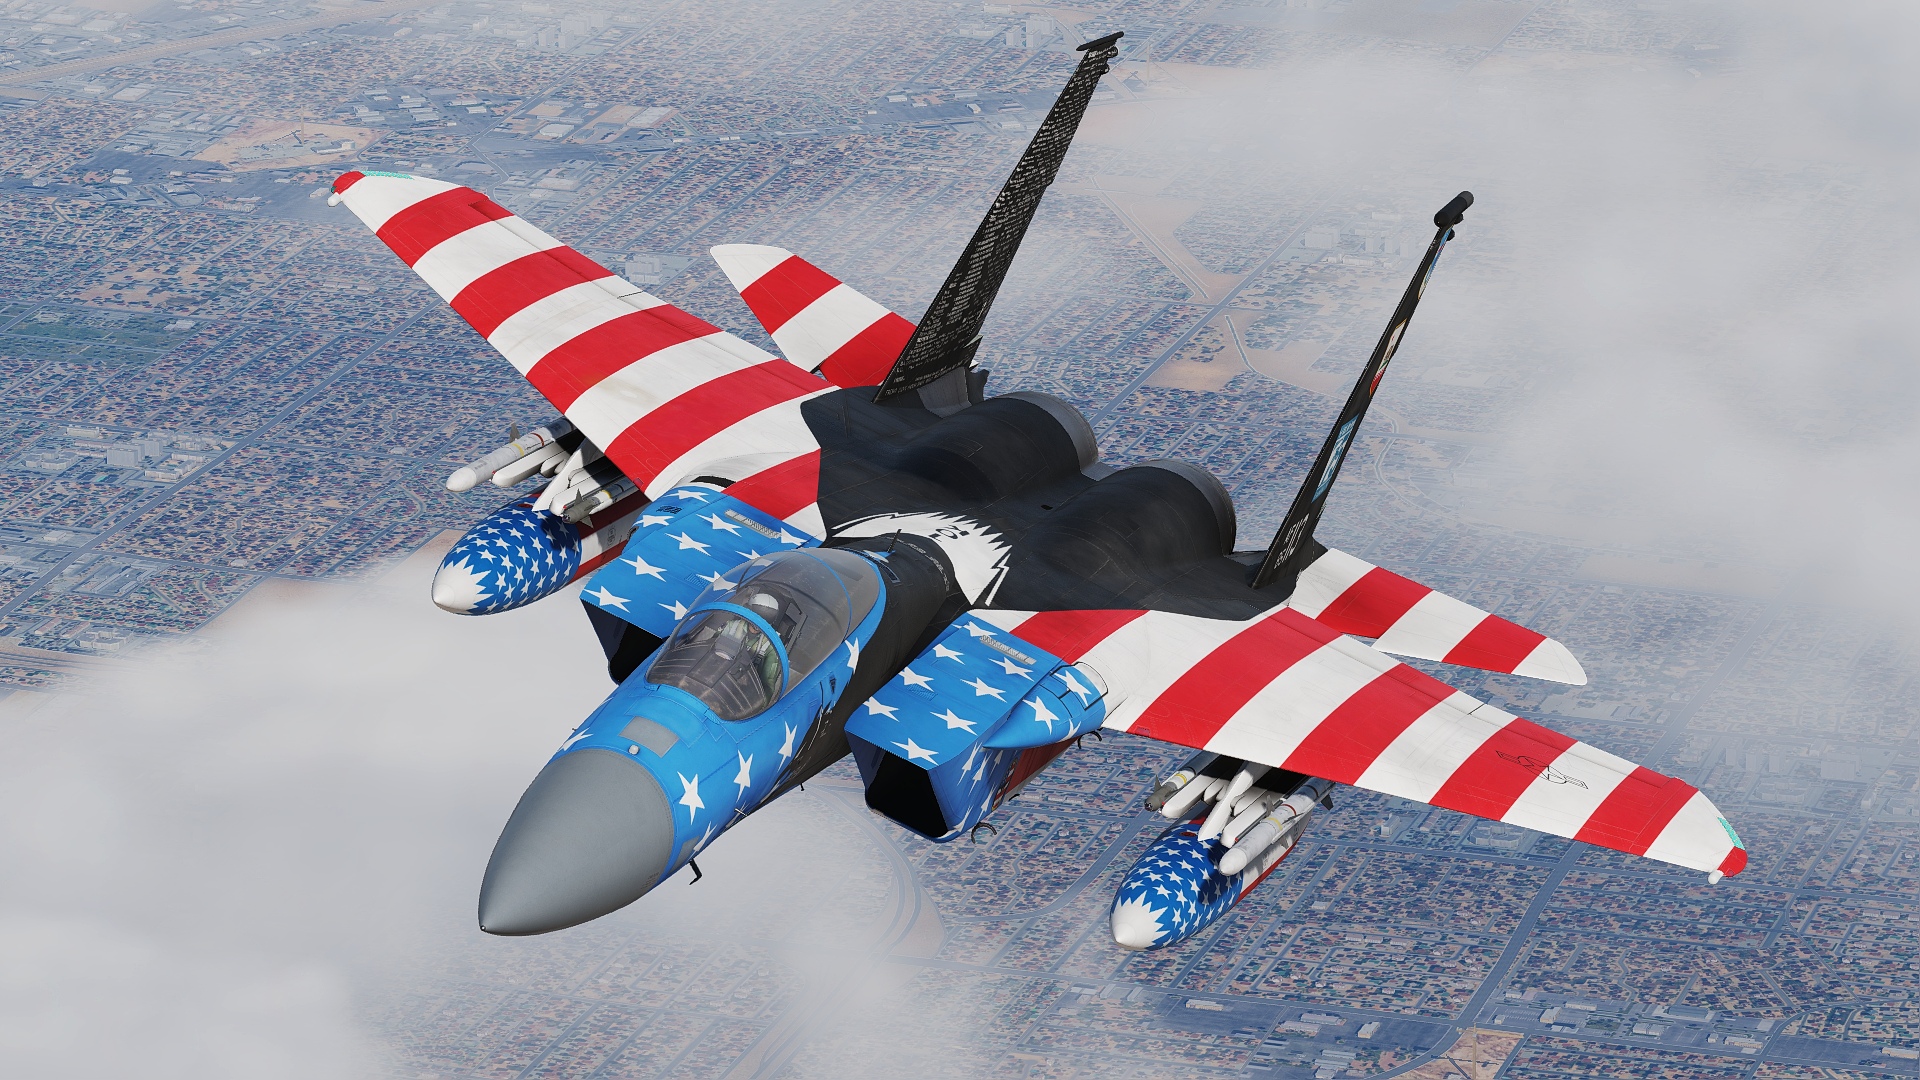 California ANG USAF 75th Anniversary Heritage Jet - 194th Fighter Squadron 144th Fighter Wing